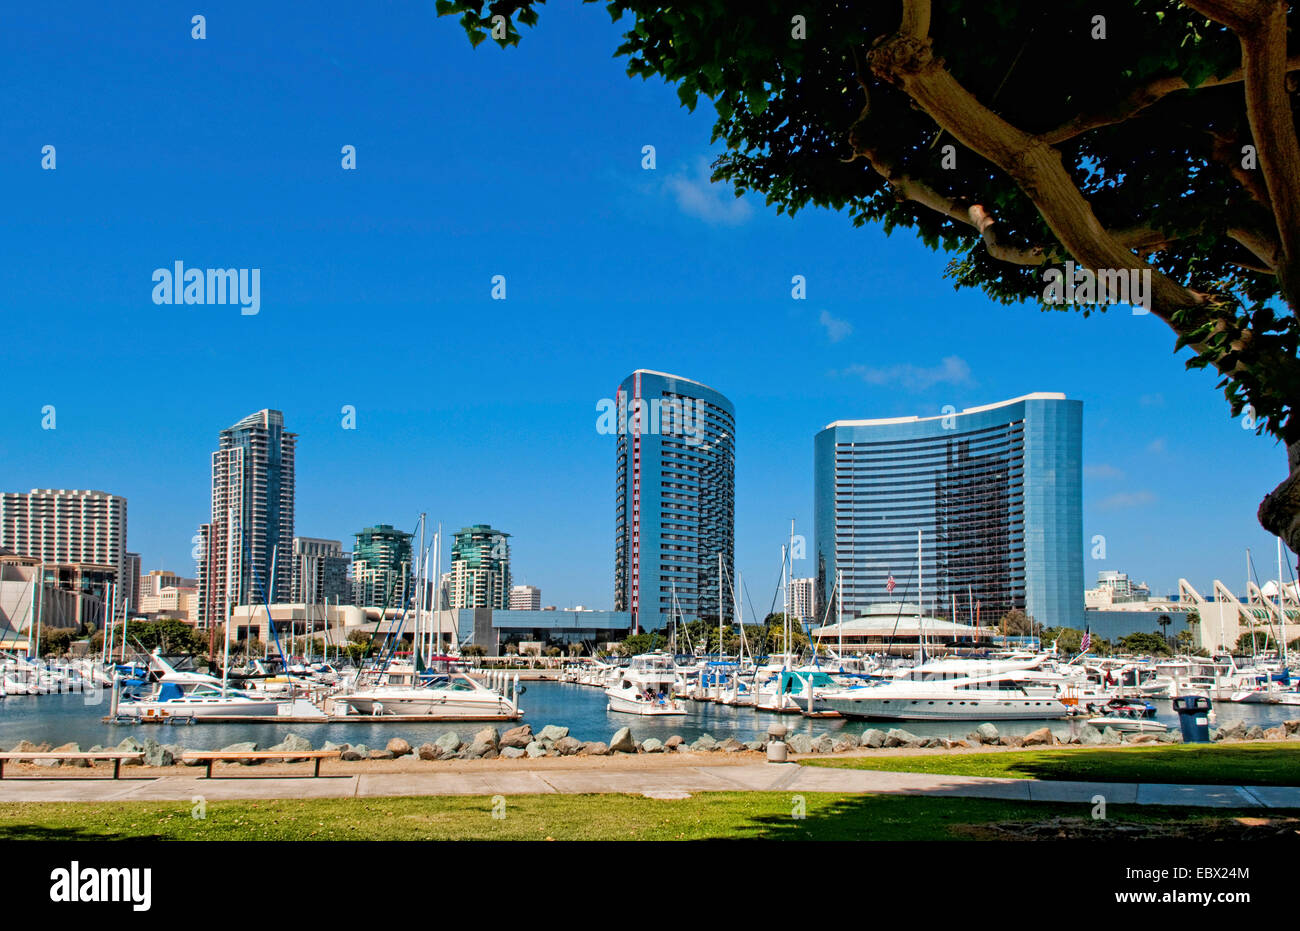 Seaport Village Marina in San Diego Bay with boats and ships in pier, USA, California, San Diego Stock Photo